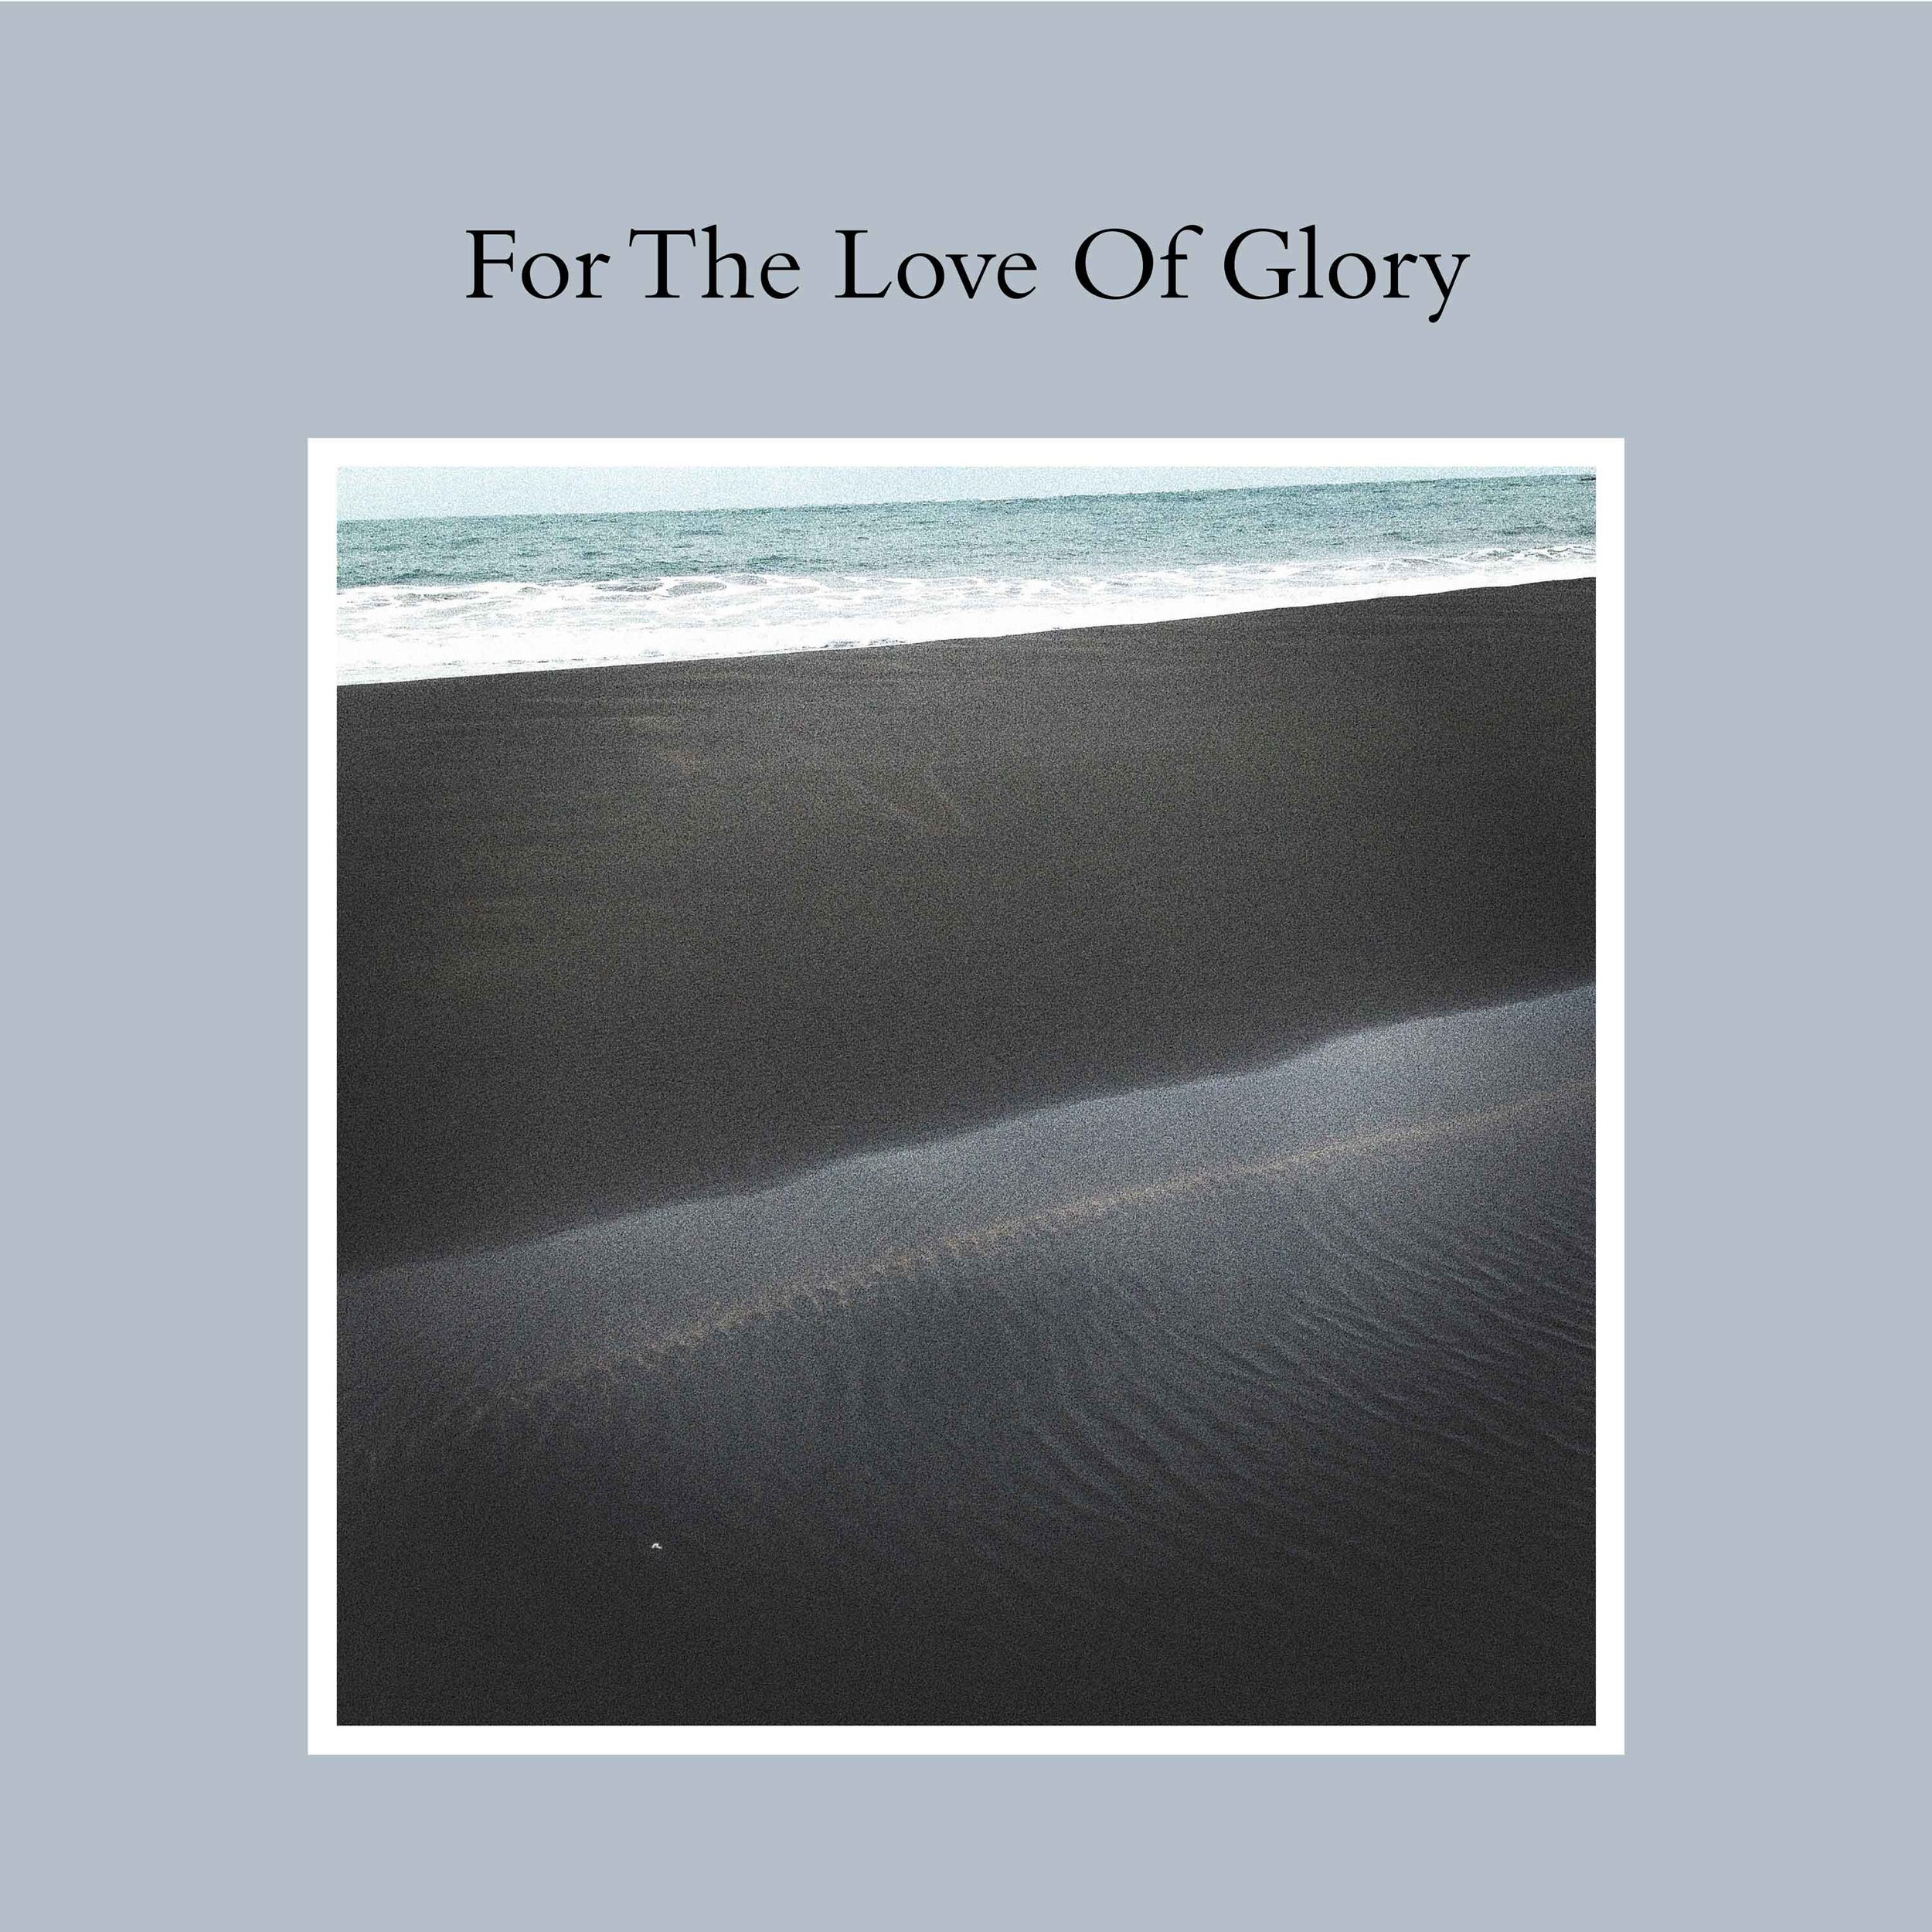 04-For-The-Love-Of-Glory.jpg